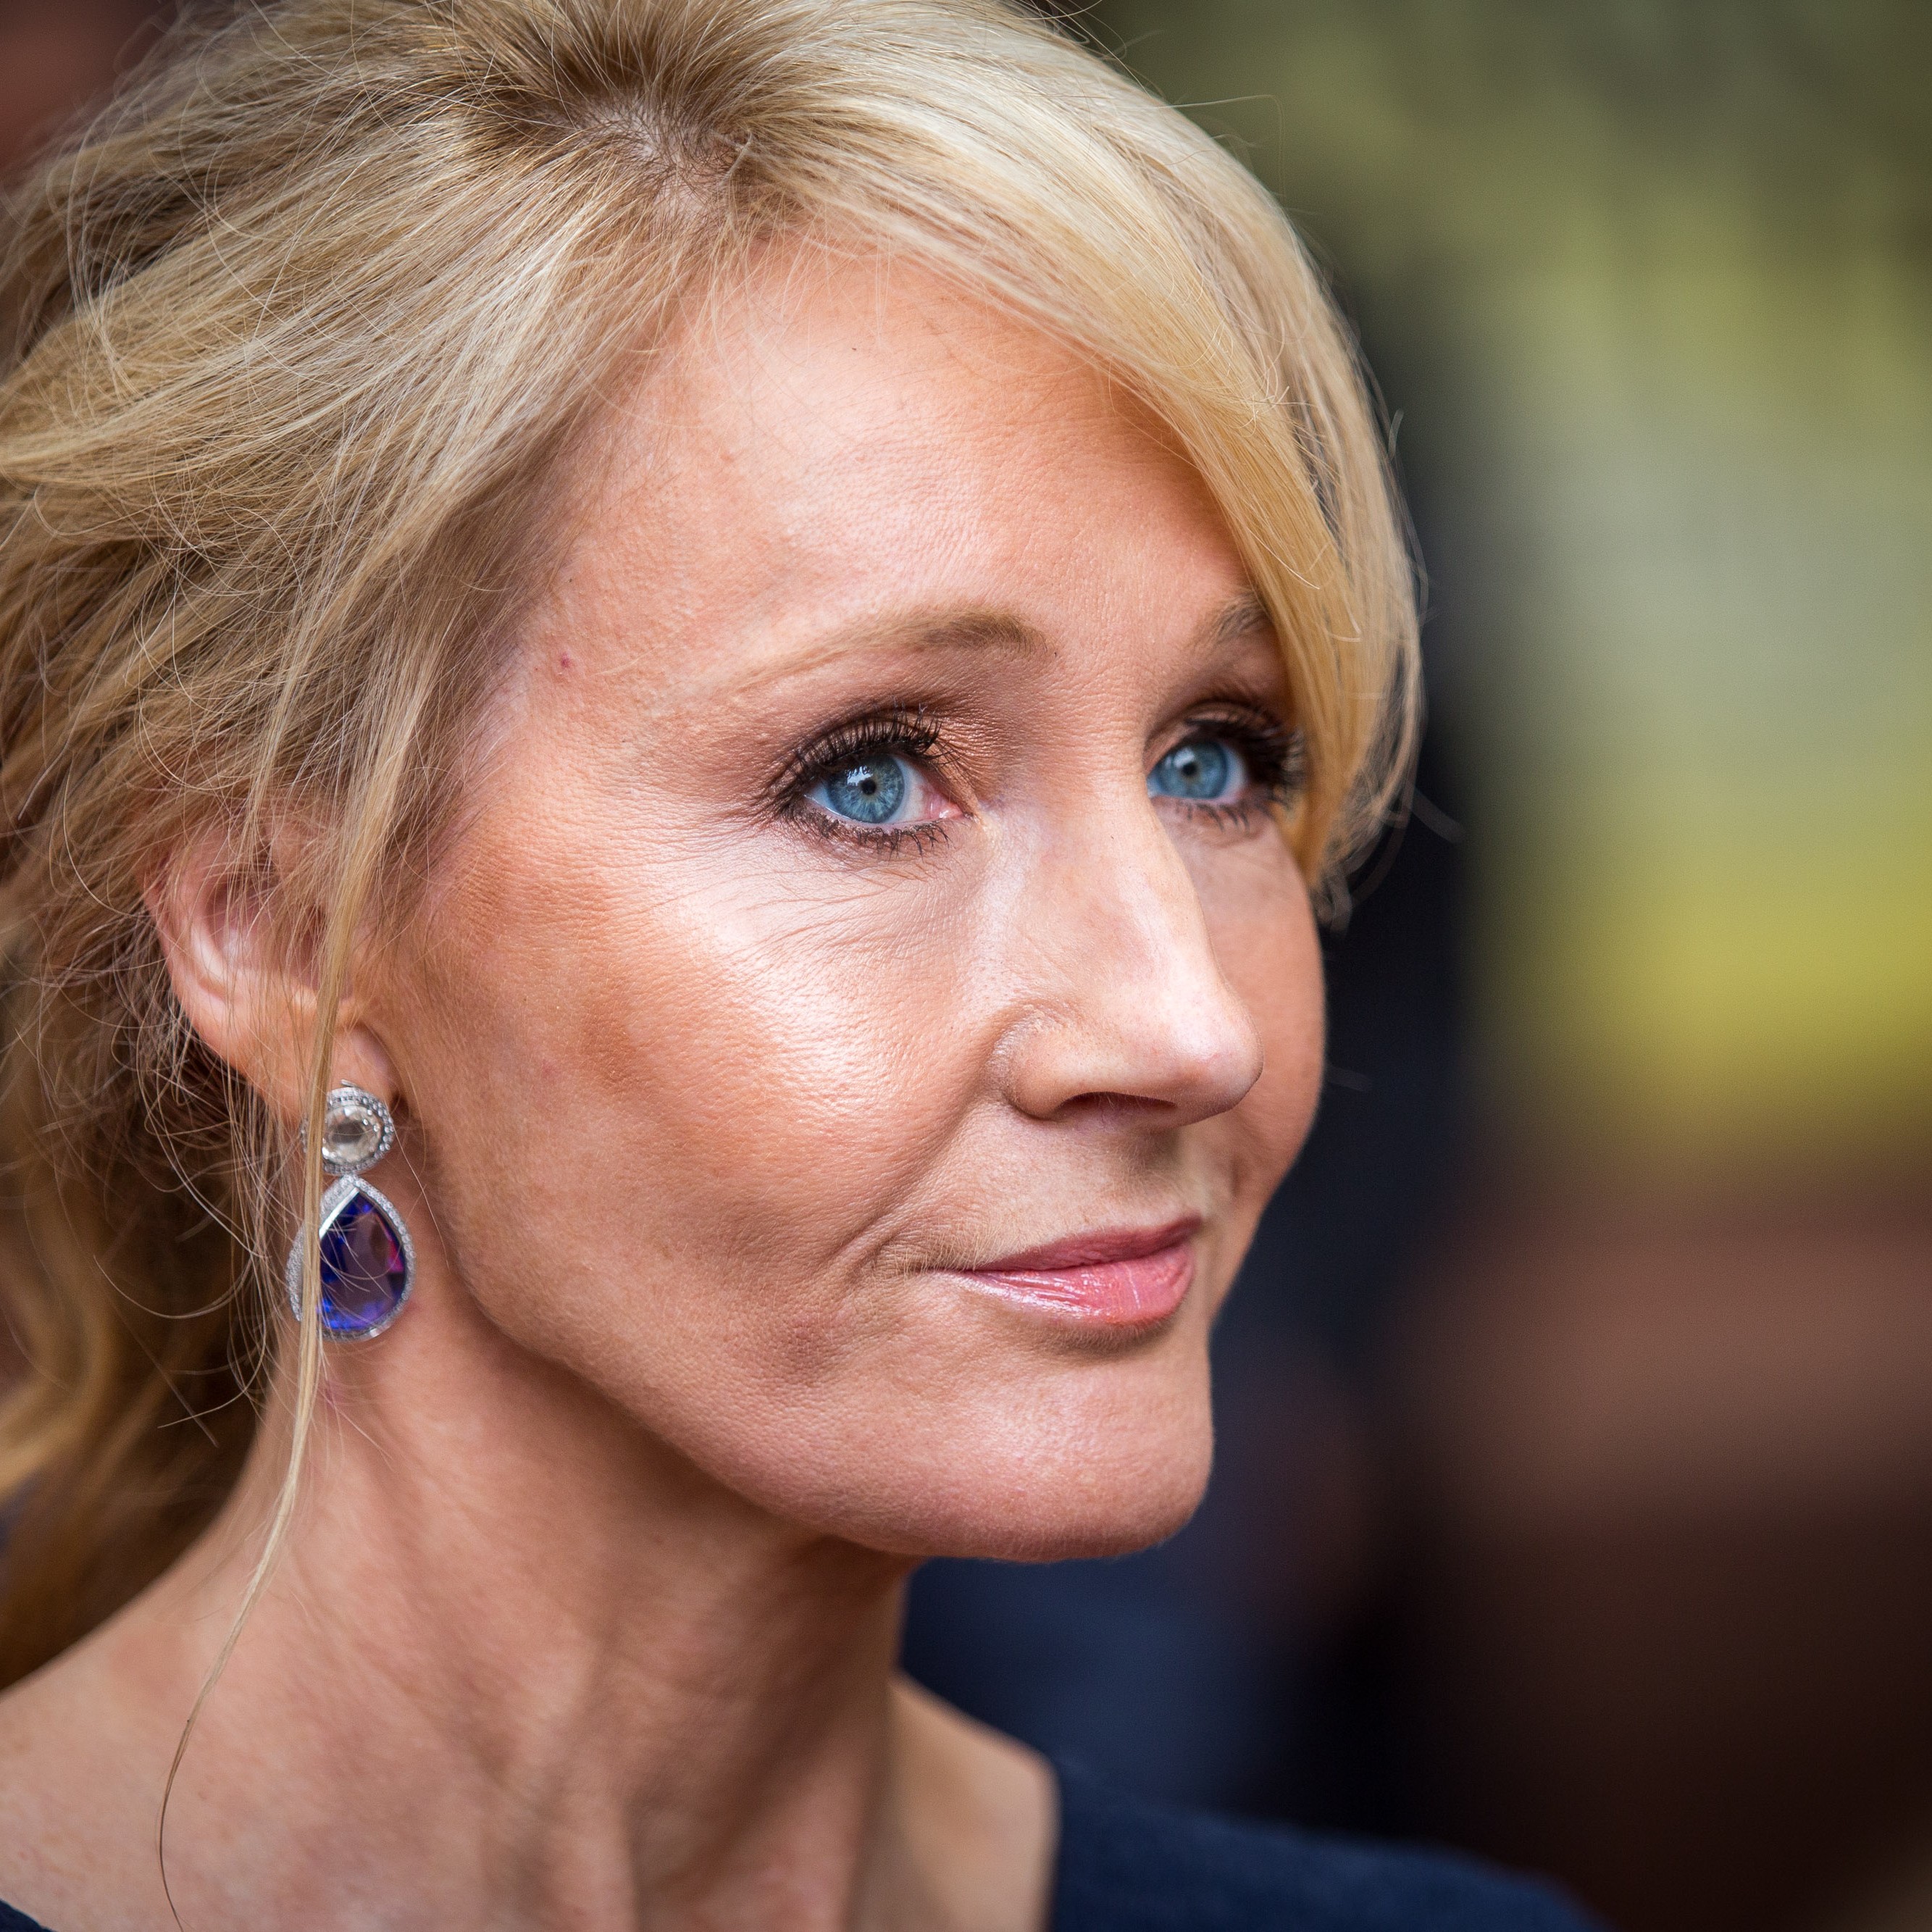 autumn hassler recommends jk rowling nude pic